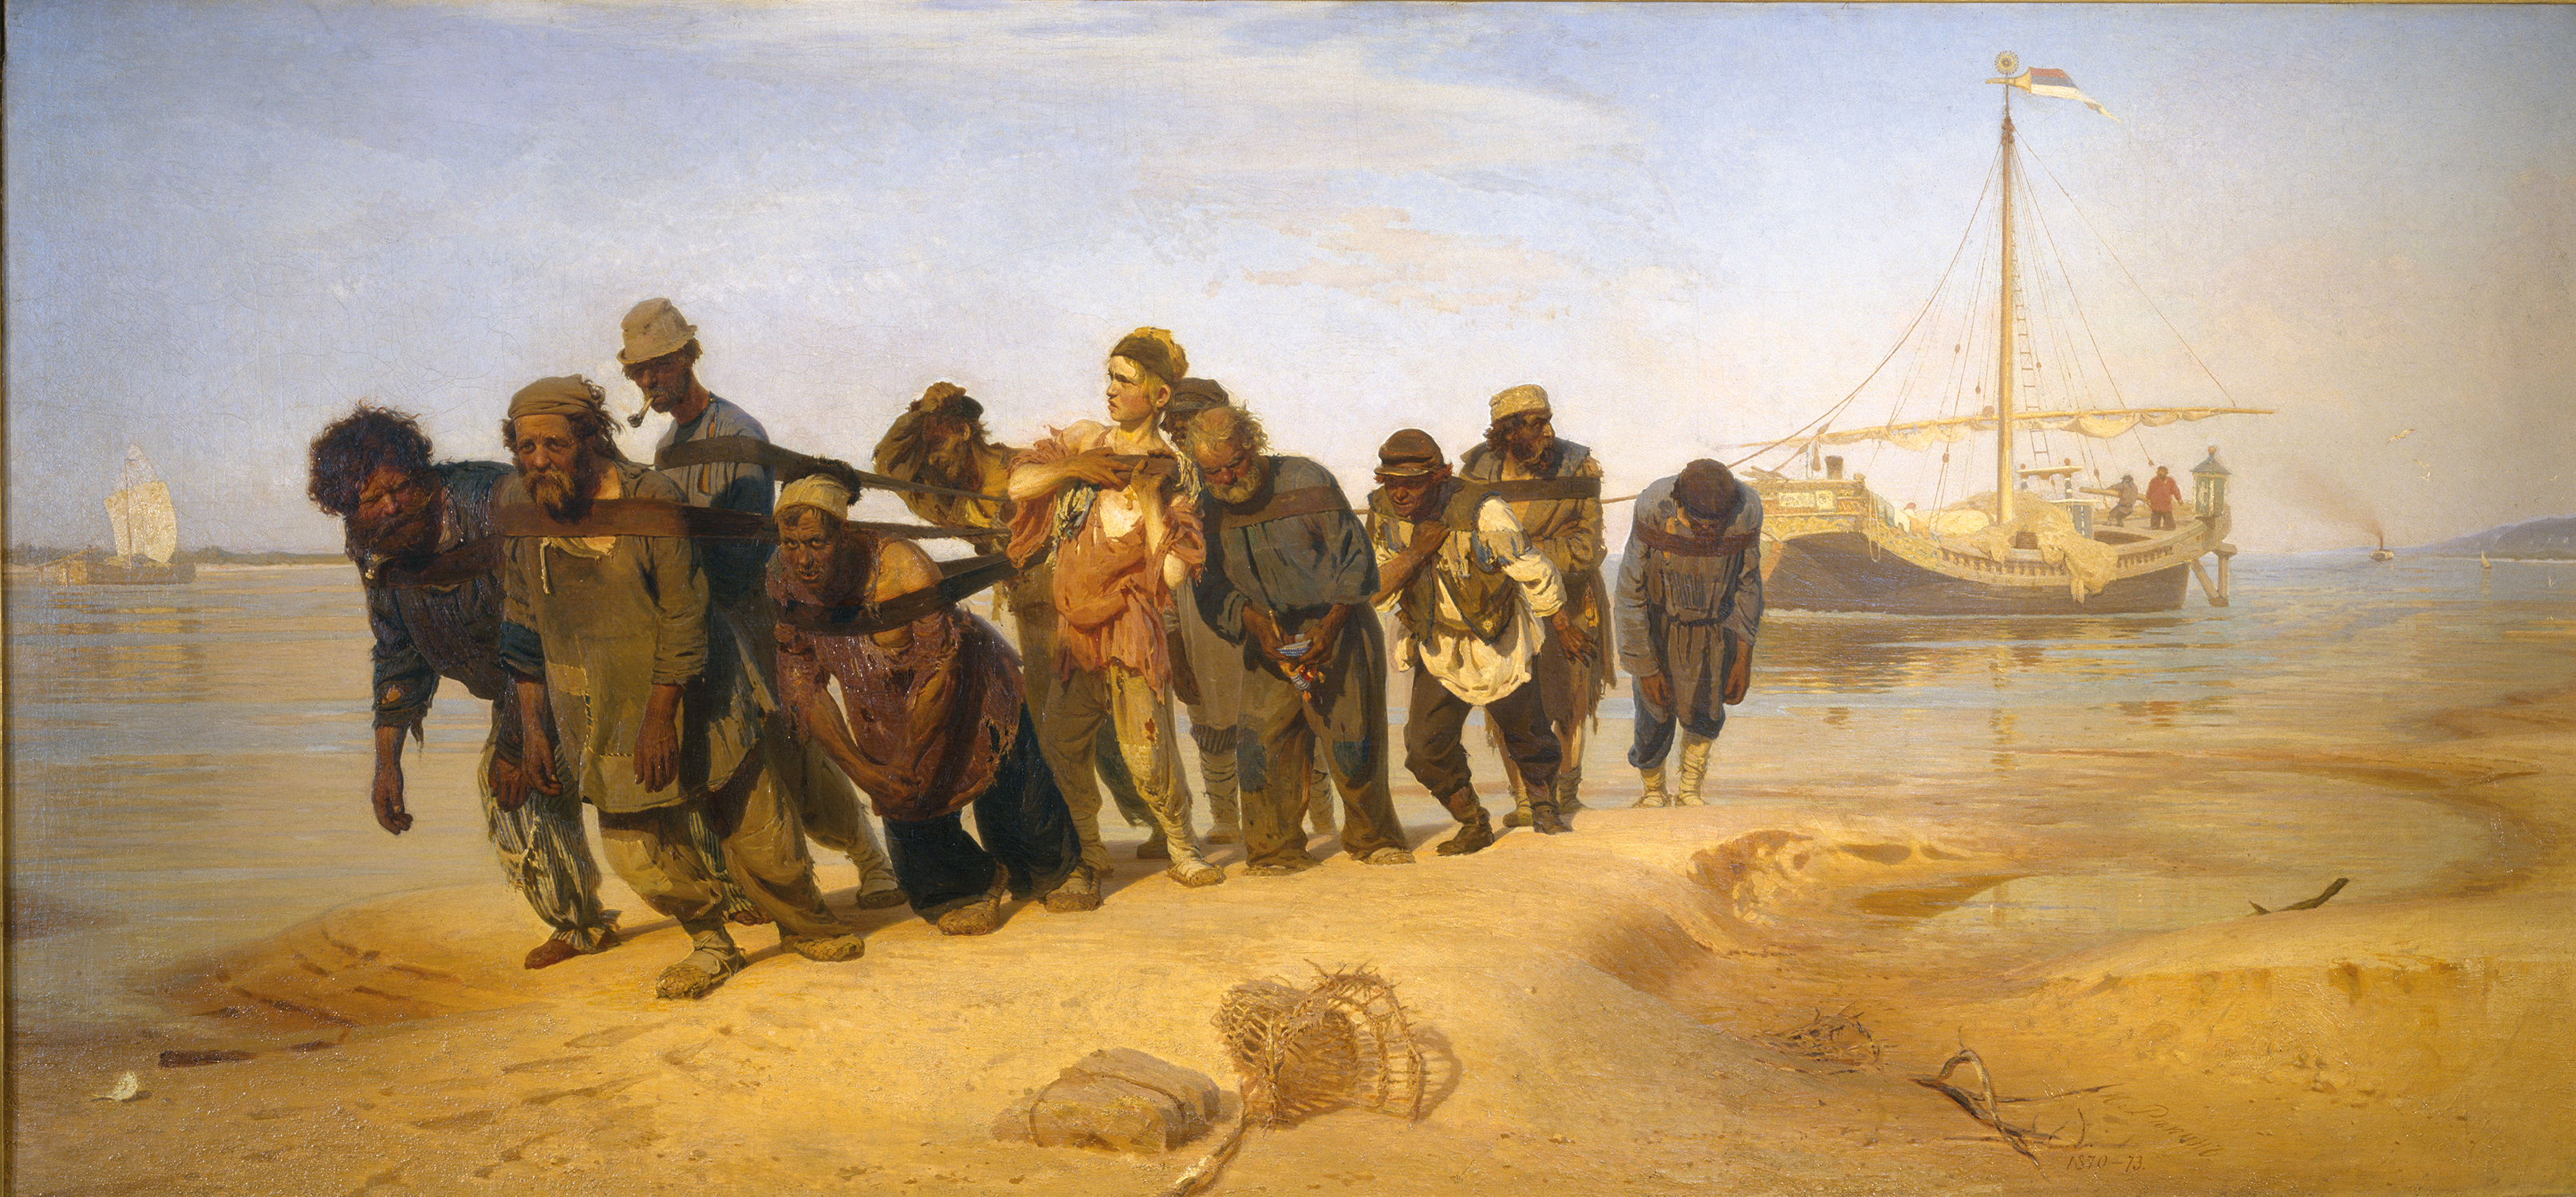 Barge Haulers on the Volga by Ilya Repin - 1873 - 131.5 cm × 281 cm State Russian Museum